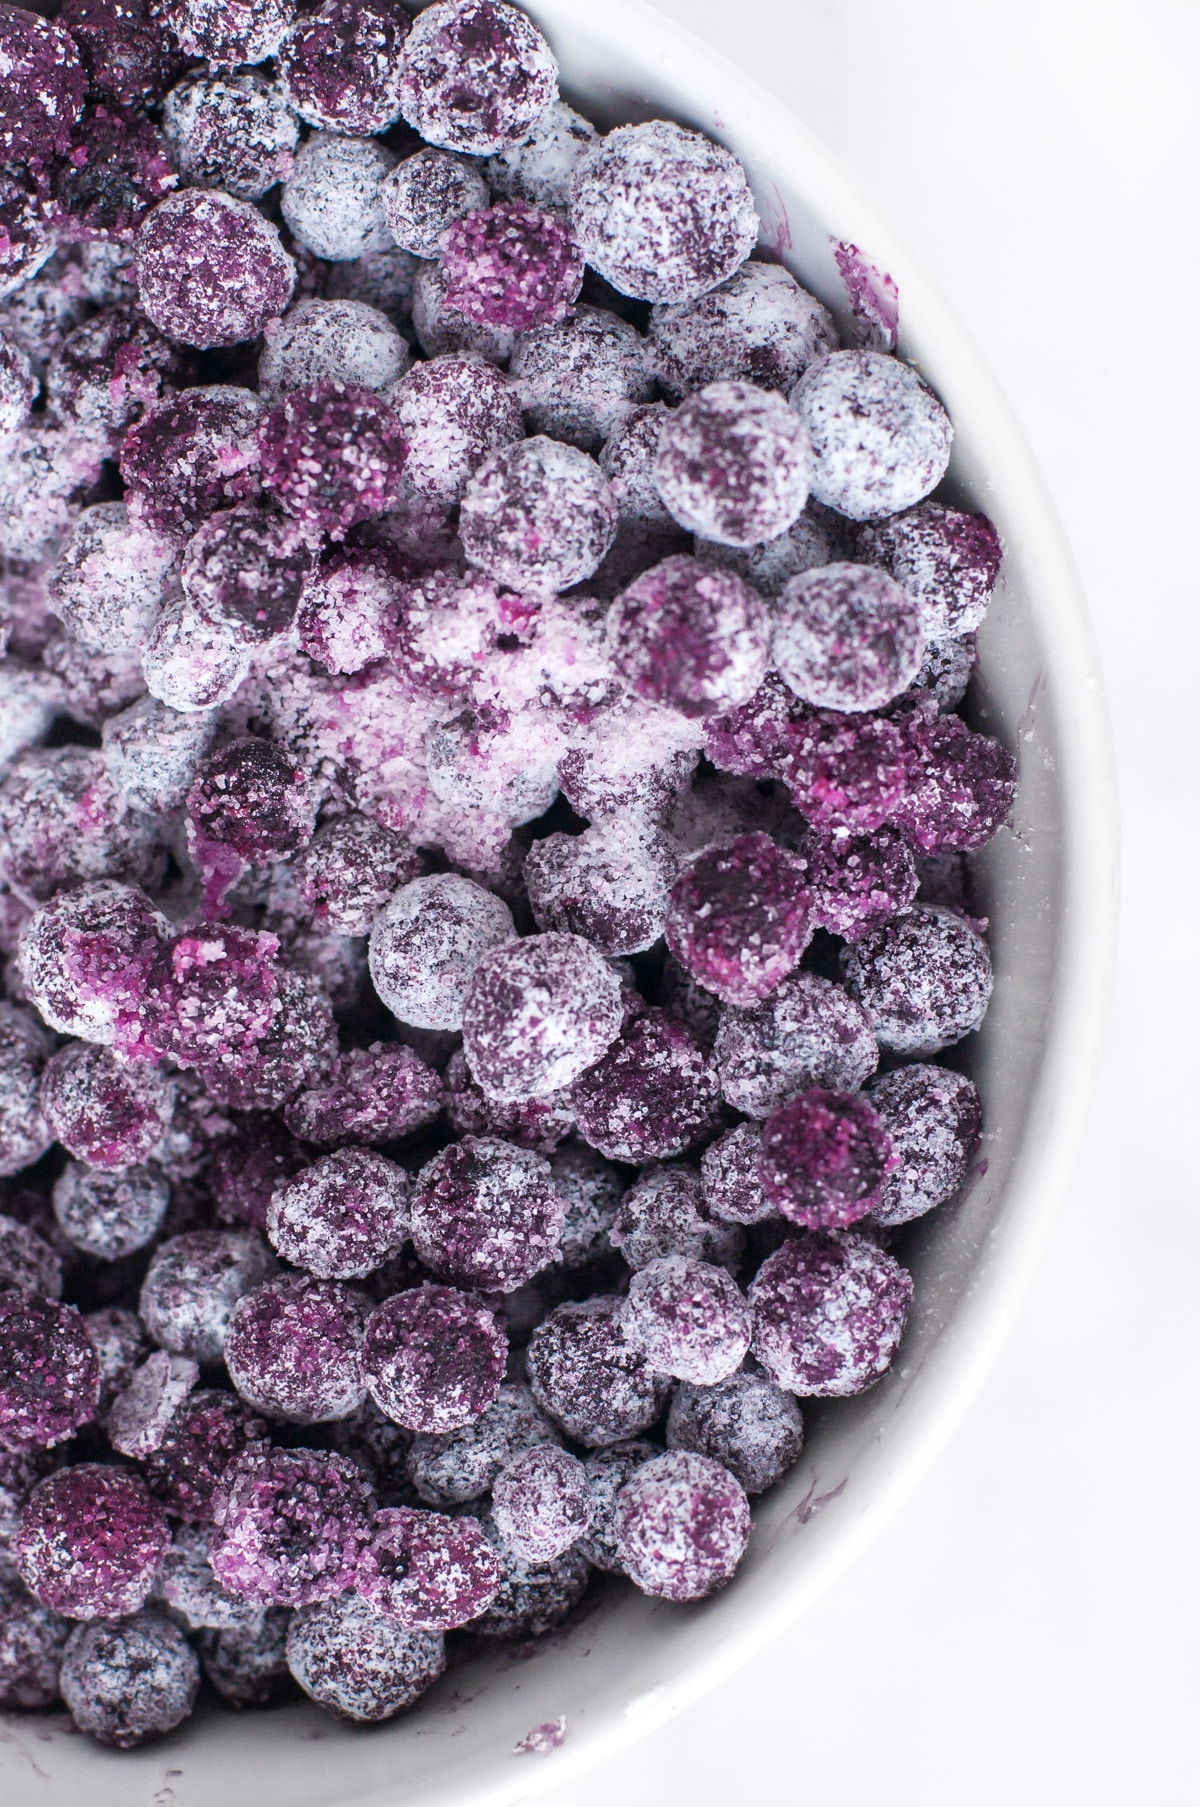 Blueberries have been coated with flour and are sitting in a white bowl.